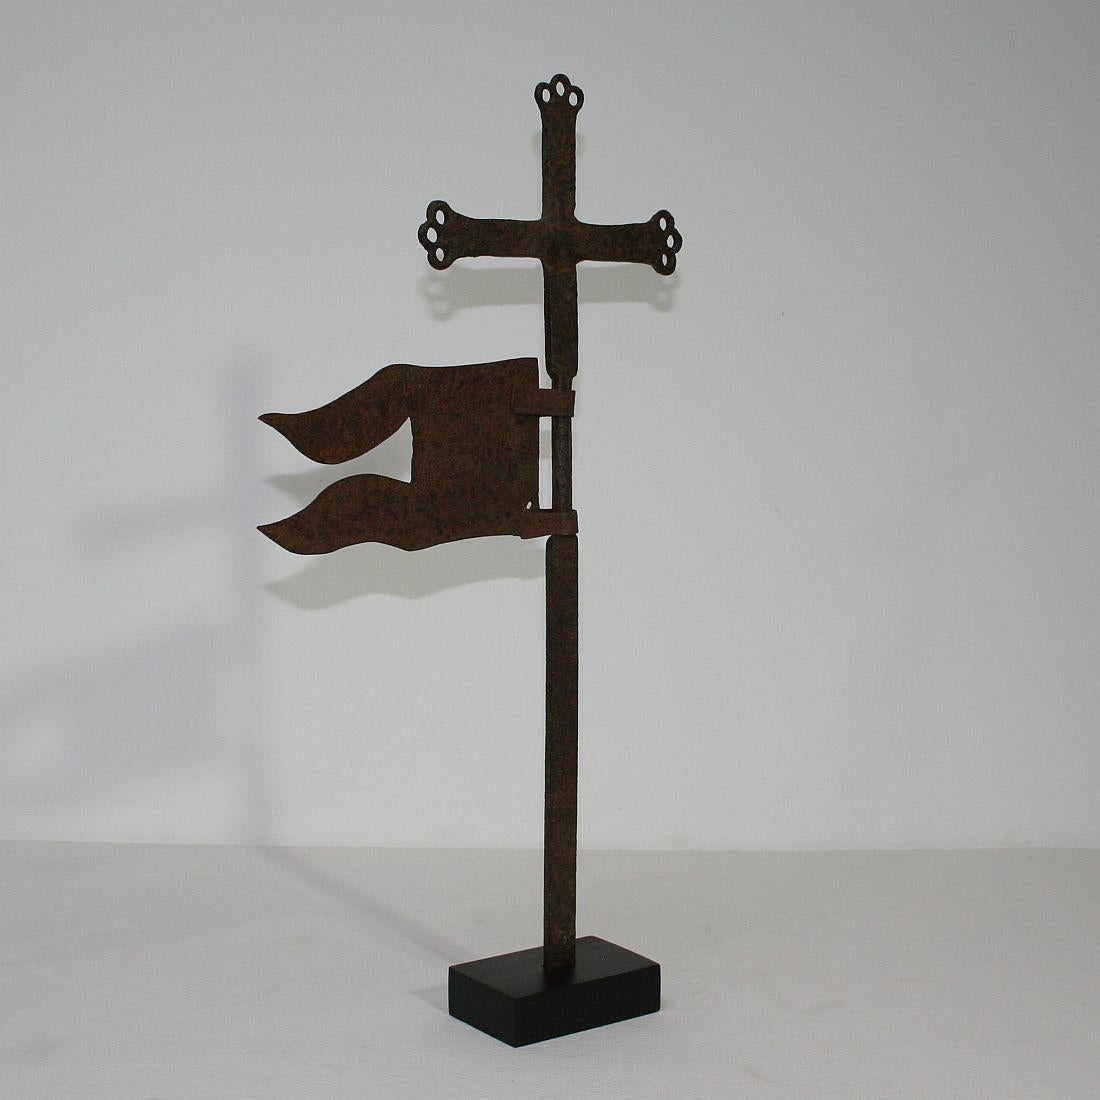 Unique hand forged iron weathervane. Beautiful eyecatcher, France, circa 1600-1700. Weathered. Measurement here below is inclusive the wooden base.